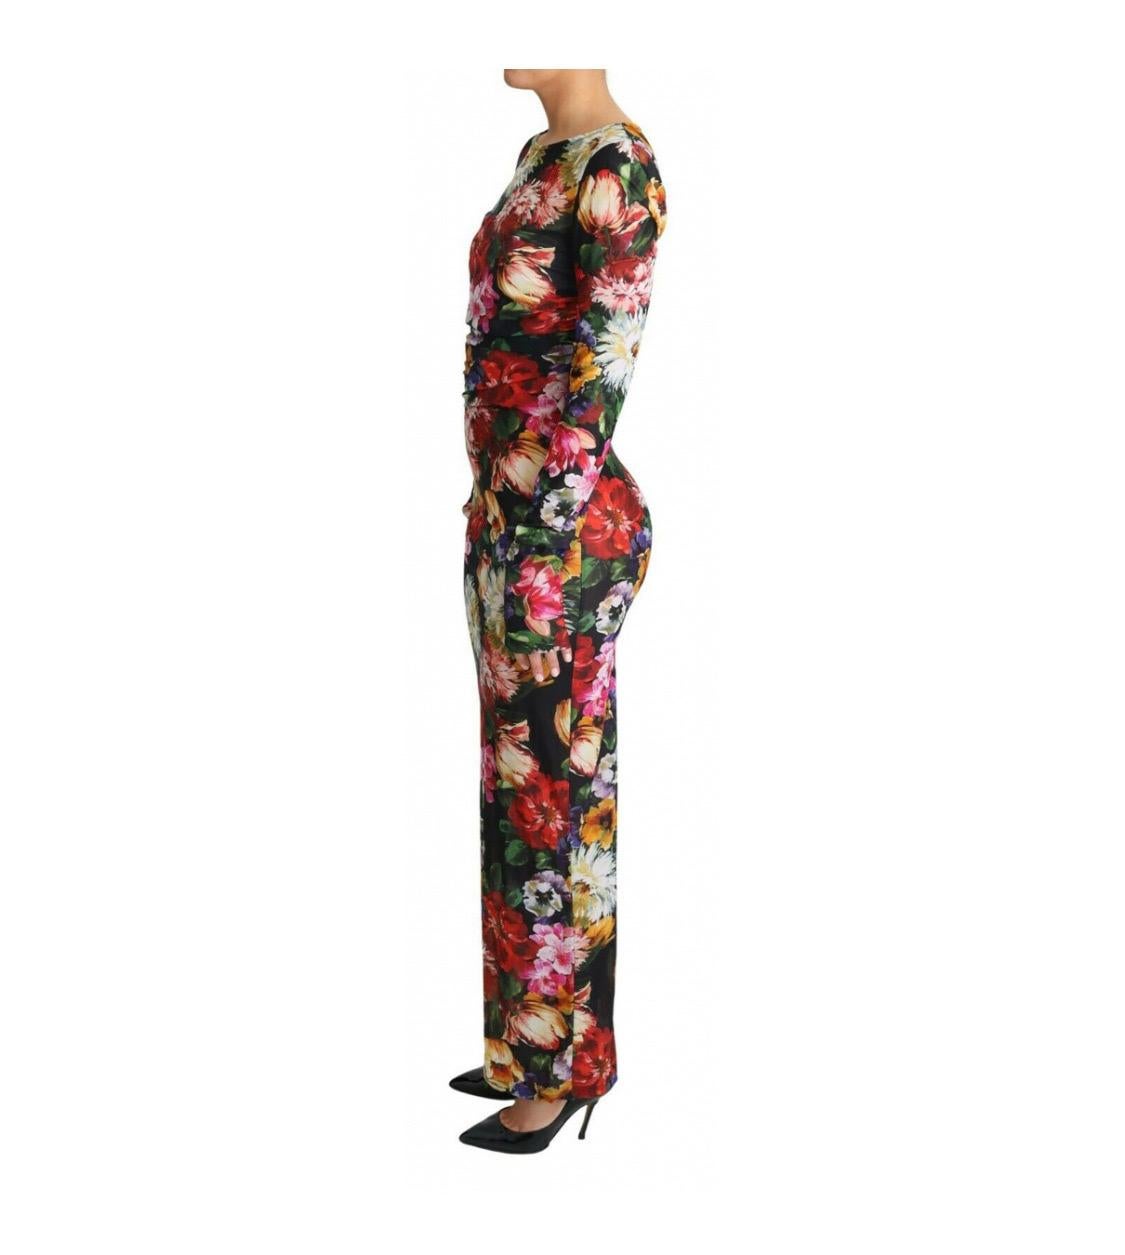 Dolce & Gabbana
Colorful sheer maxi multicolor floral dress 1